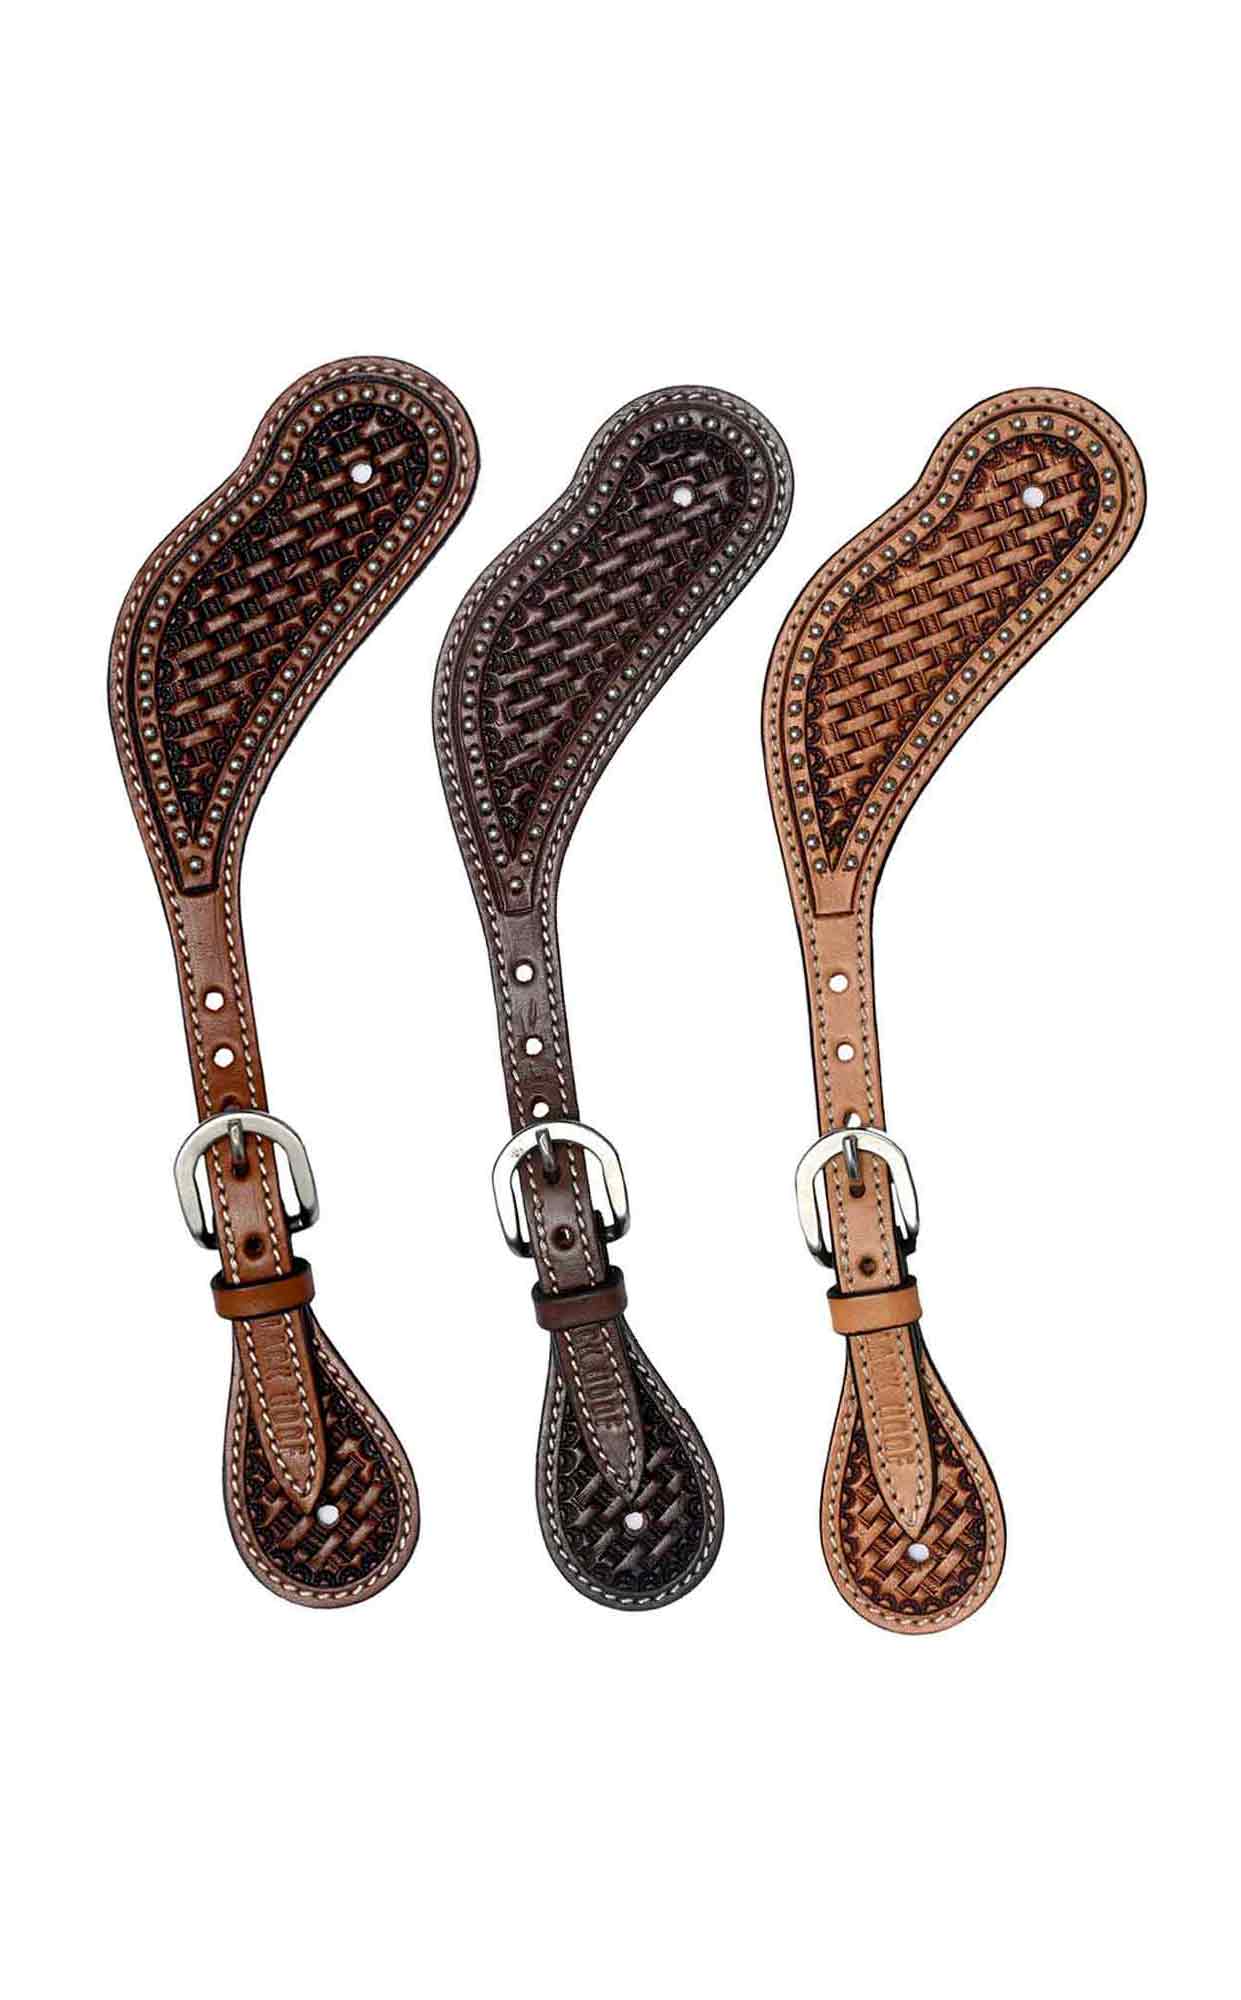 Black Hoof  Basket Tooled Leather Spur Straps with silver spots for Horse Riders | Western Men, Women, Adjustable Single Ply Spur Straps | Equestrian Accessories